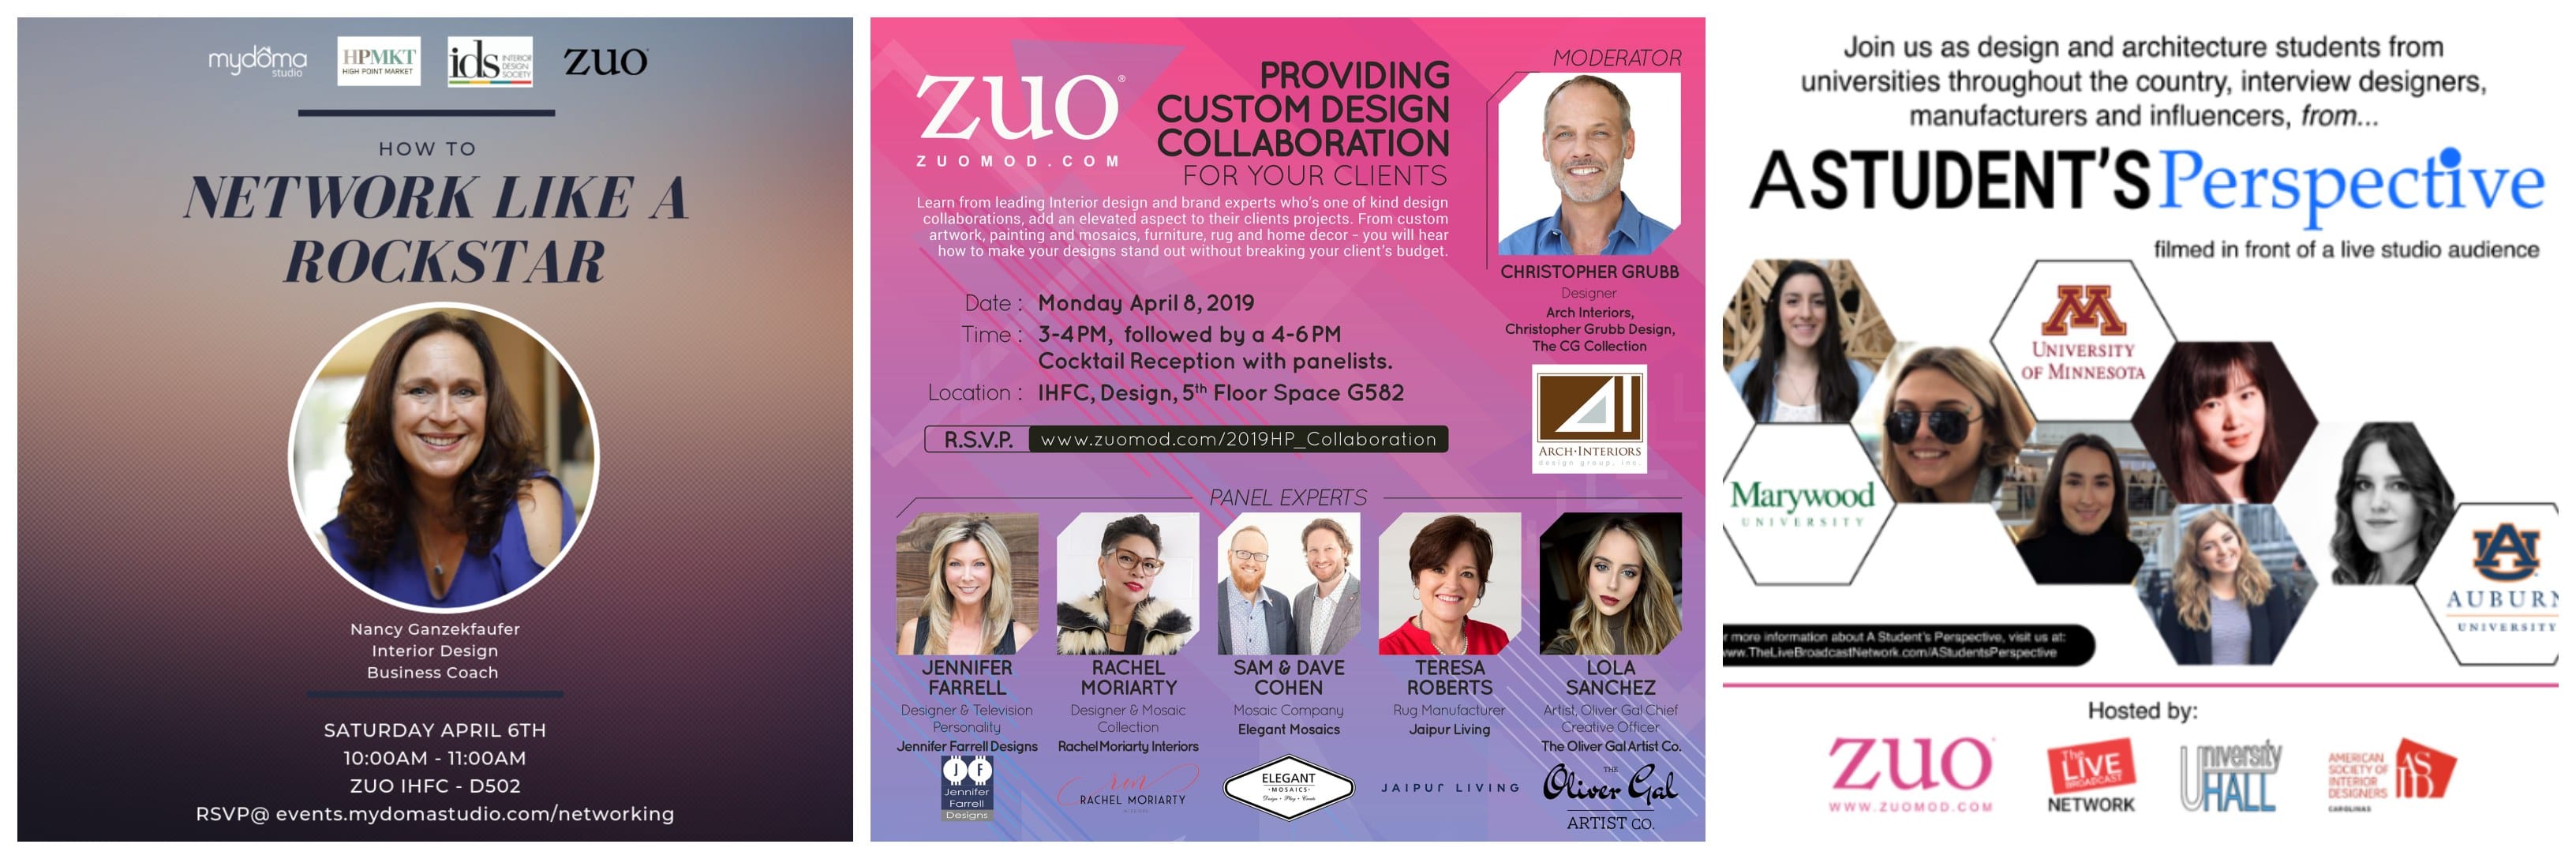 ZUO announces Spring 2019 High Point Market - Marketing andand Event Schedule